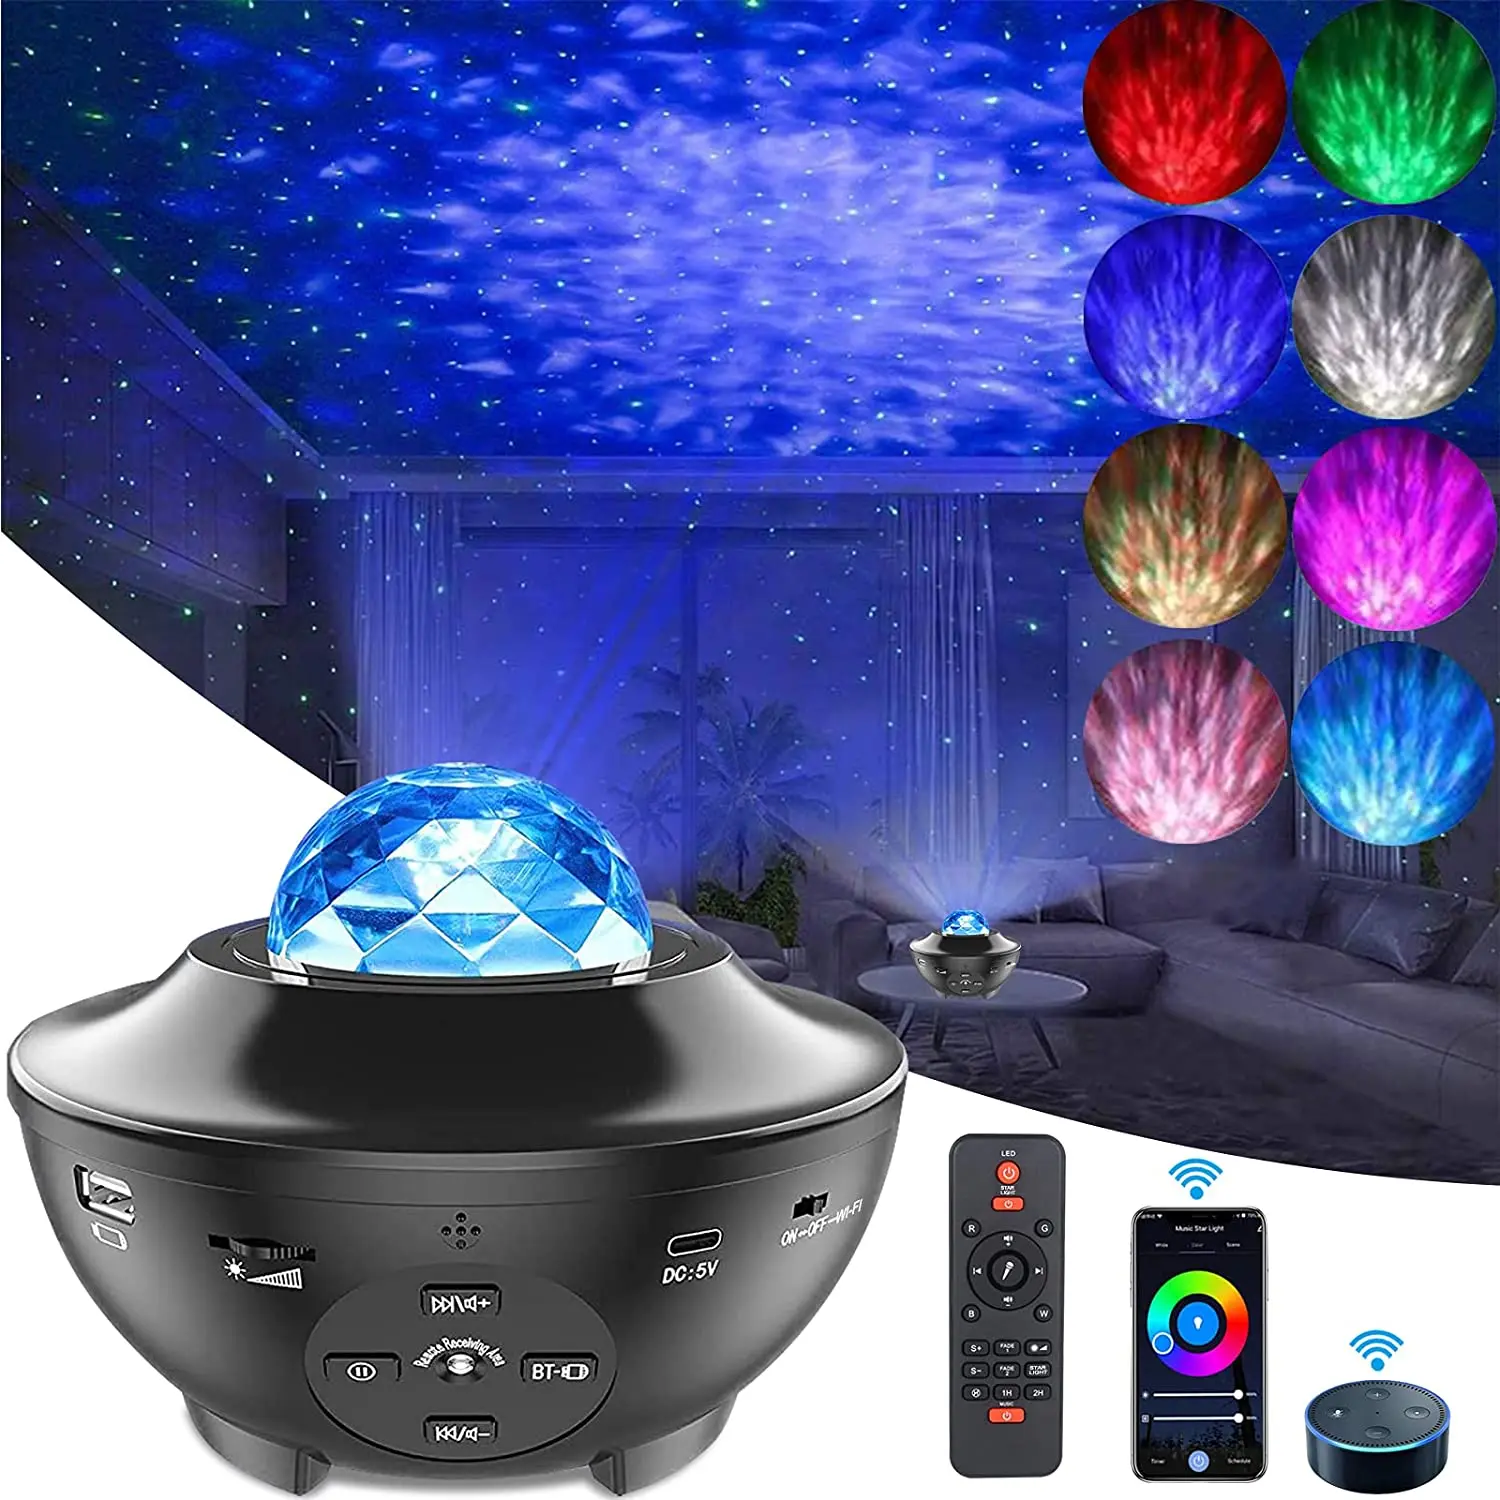 Smart Night-Light-Projector for Livingroom/Game Rooms Galaxy-Projector for Bedroom Black Yamla Star-Projector Works with Alexa Google Home Sky-lite with App Control Bluetooth Speaker Timer 